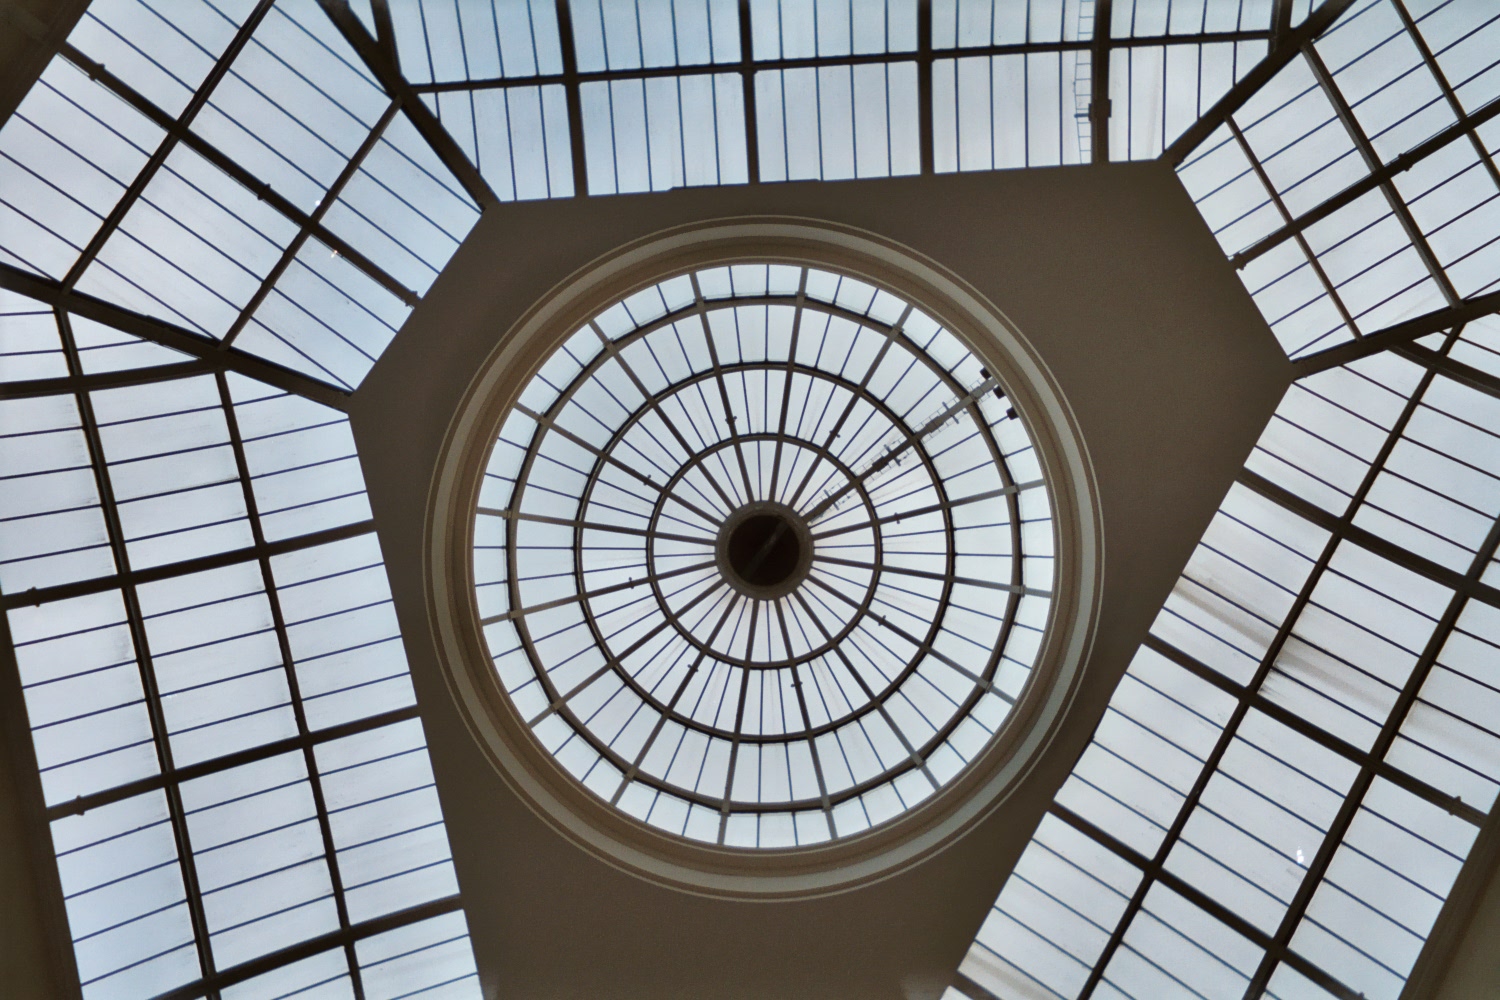 The roof of the Triangle/Corn Exchange, Manchester